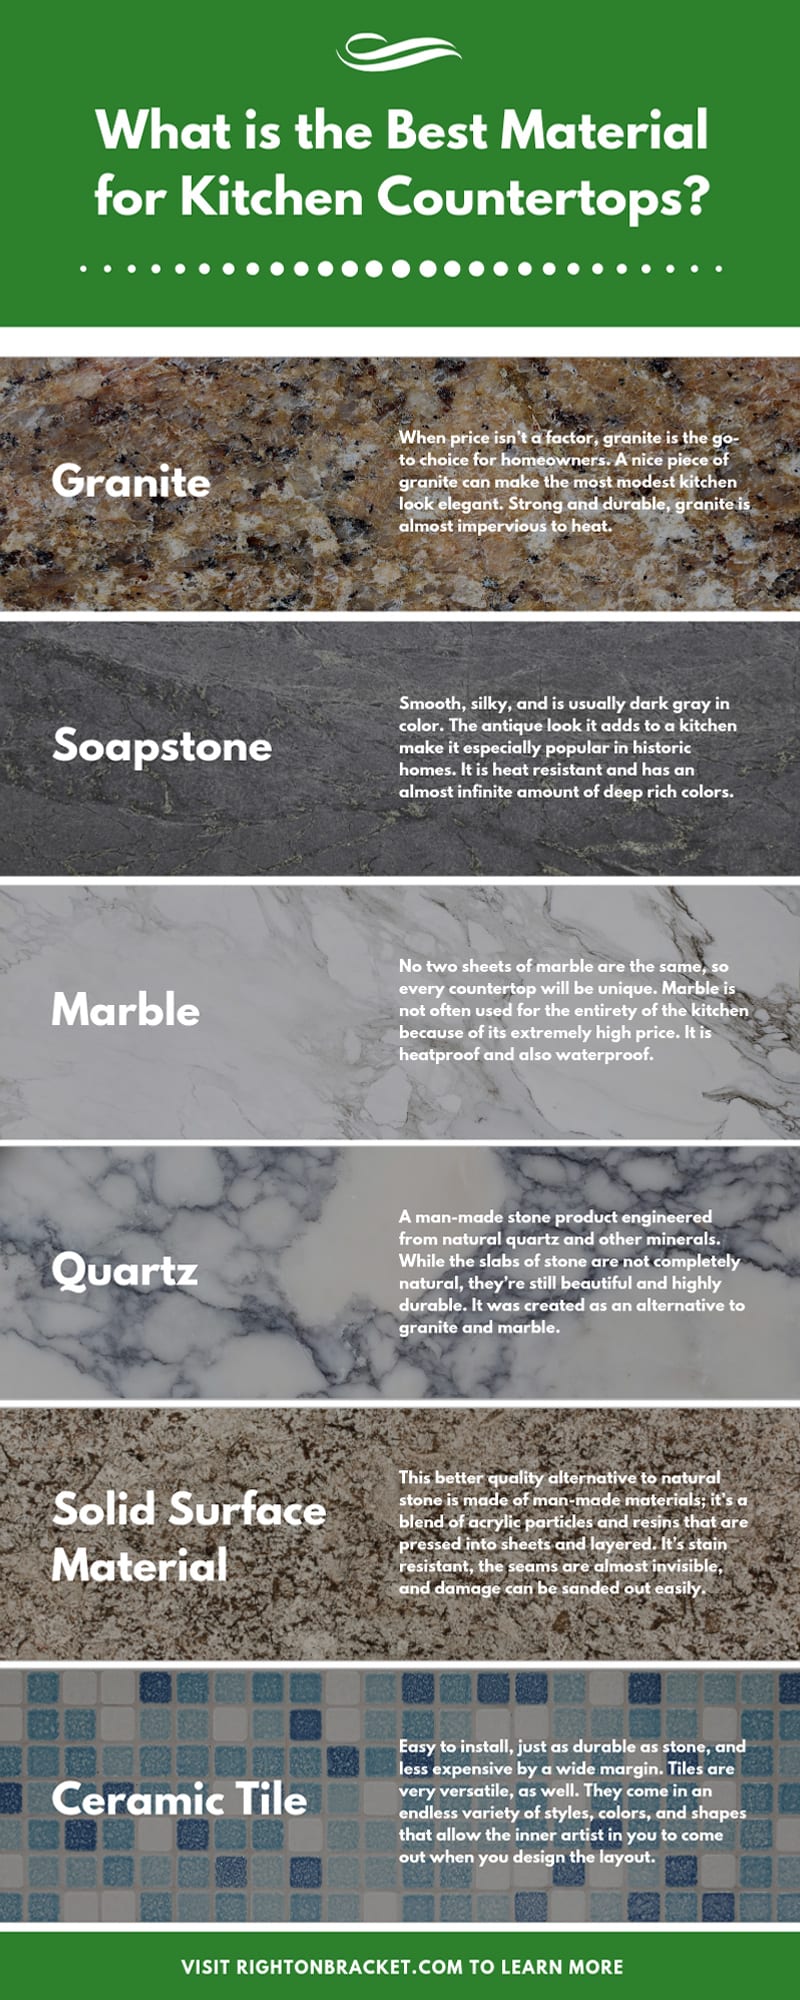 What is the Best Material for Kitchen Countertops infographic